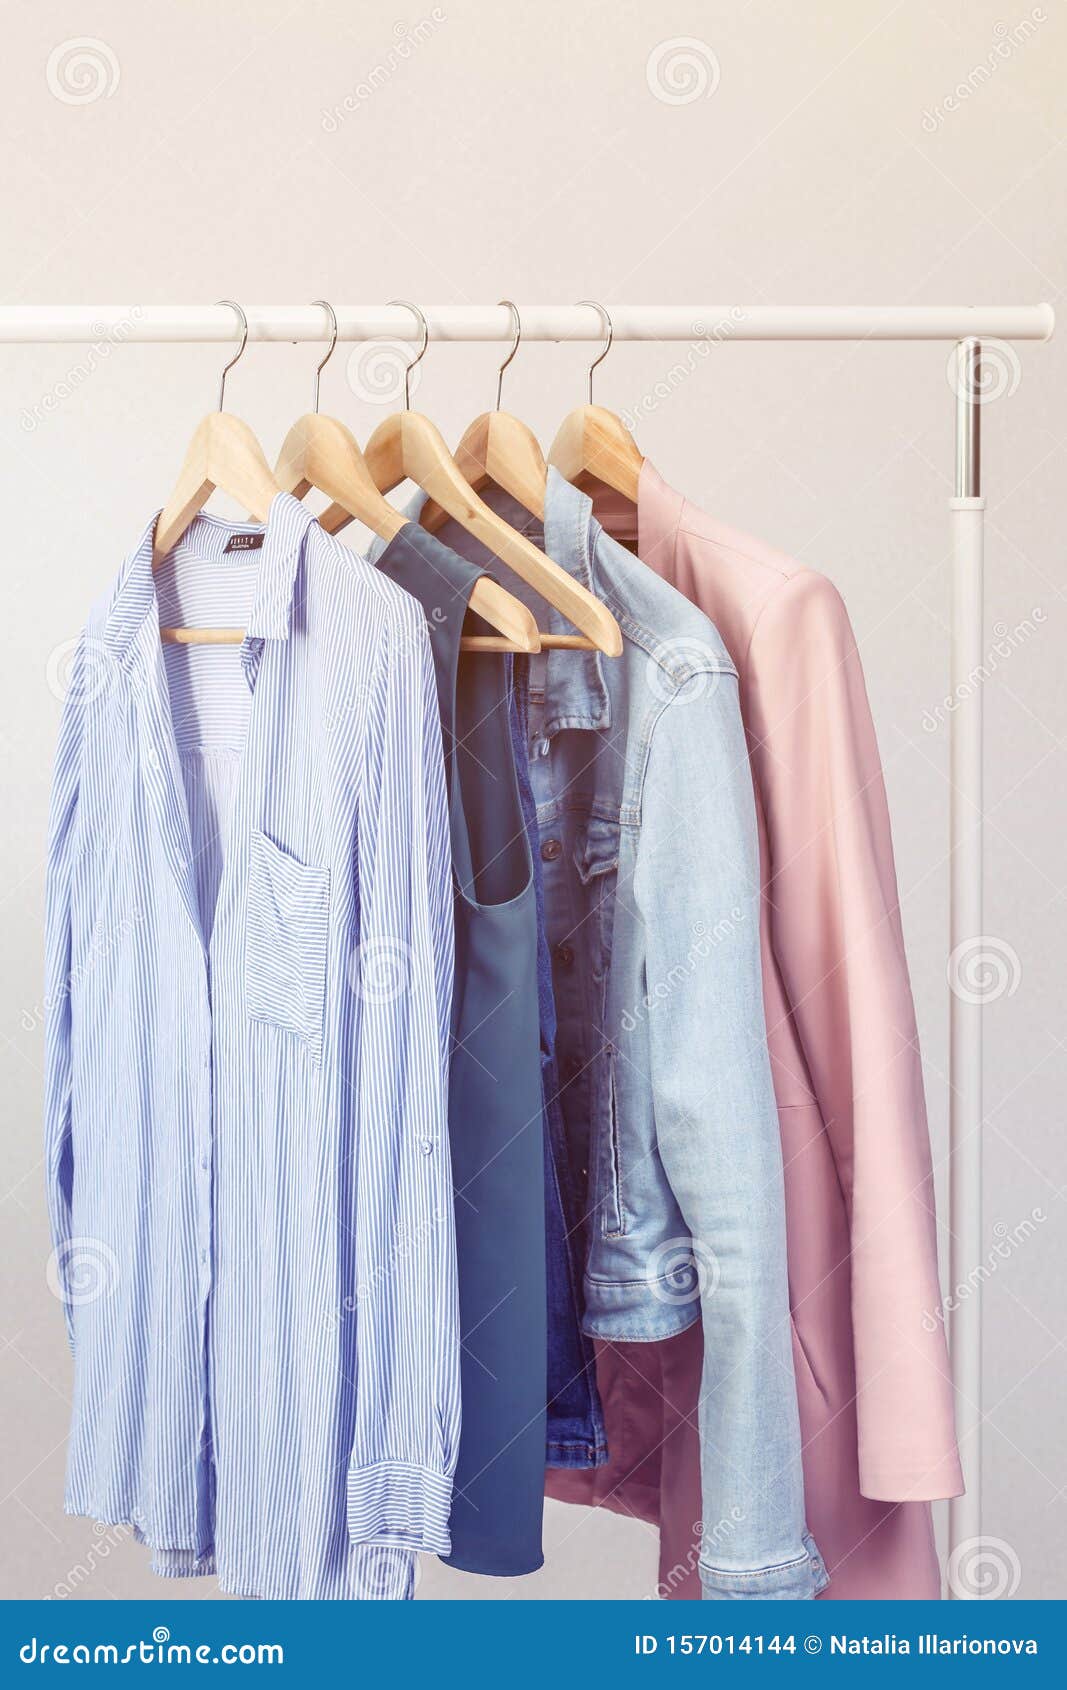 Collection of Clothes Hanging on Rack Near White Wall. Stock Photo ...